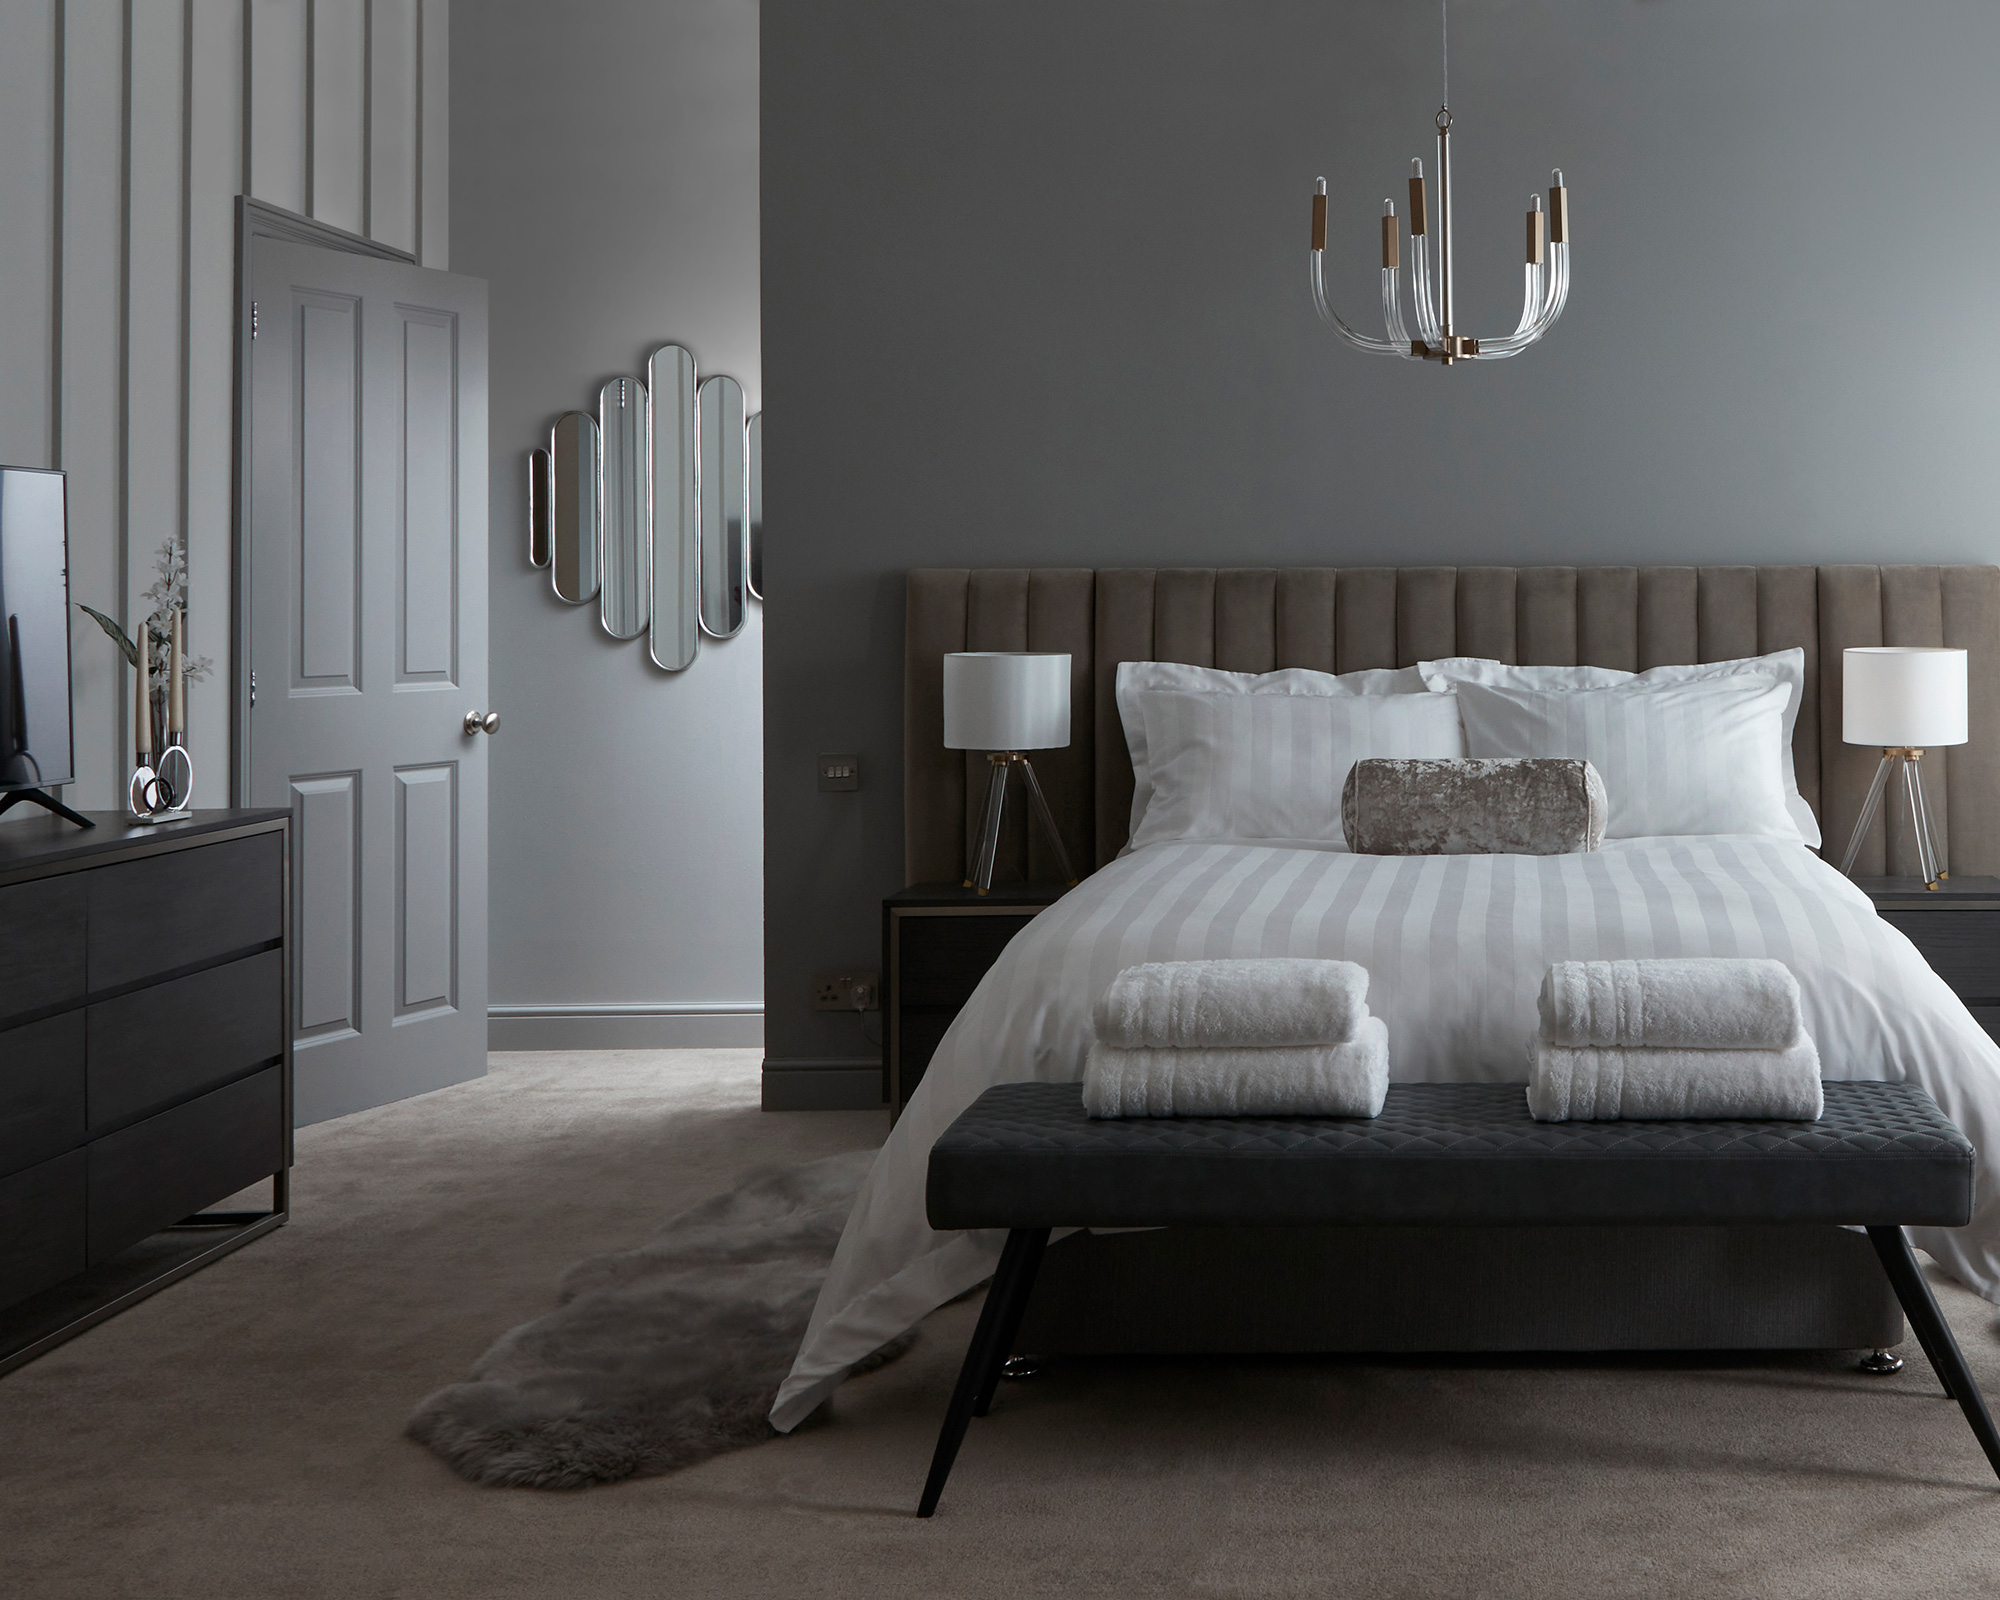 Grey bedroom with claw-like ceiling light fixture and two white lampshades